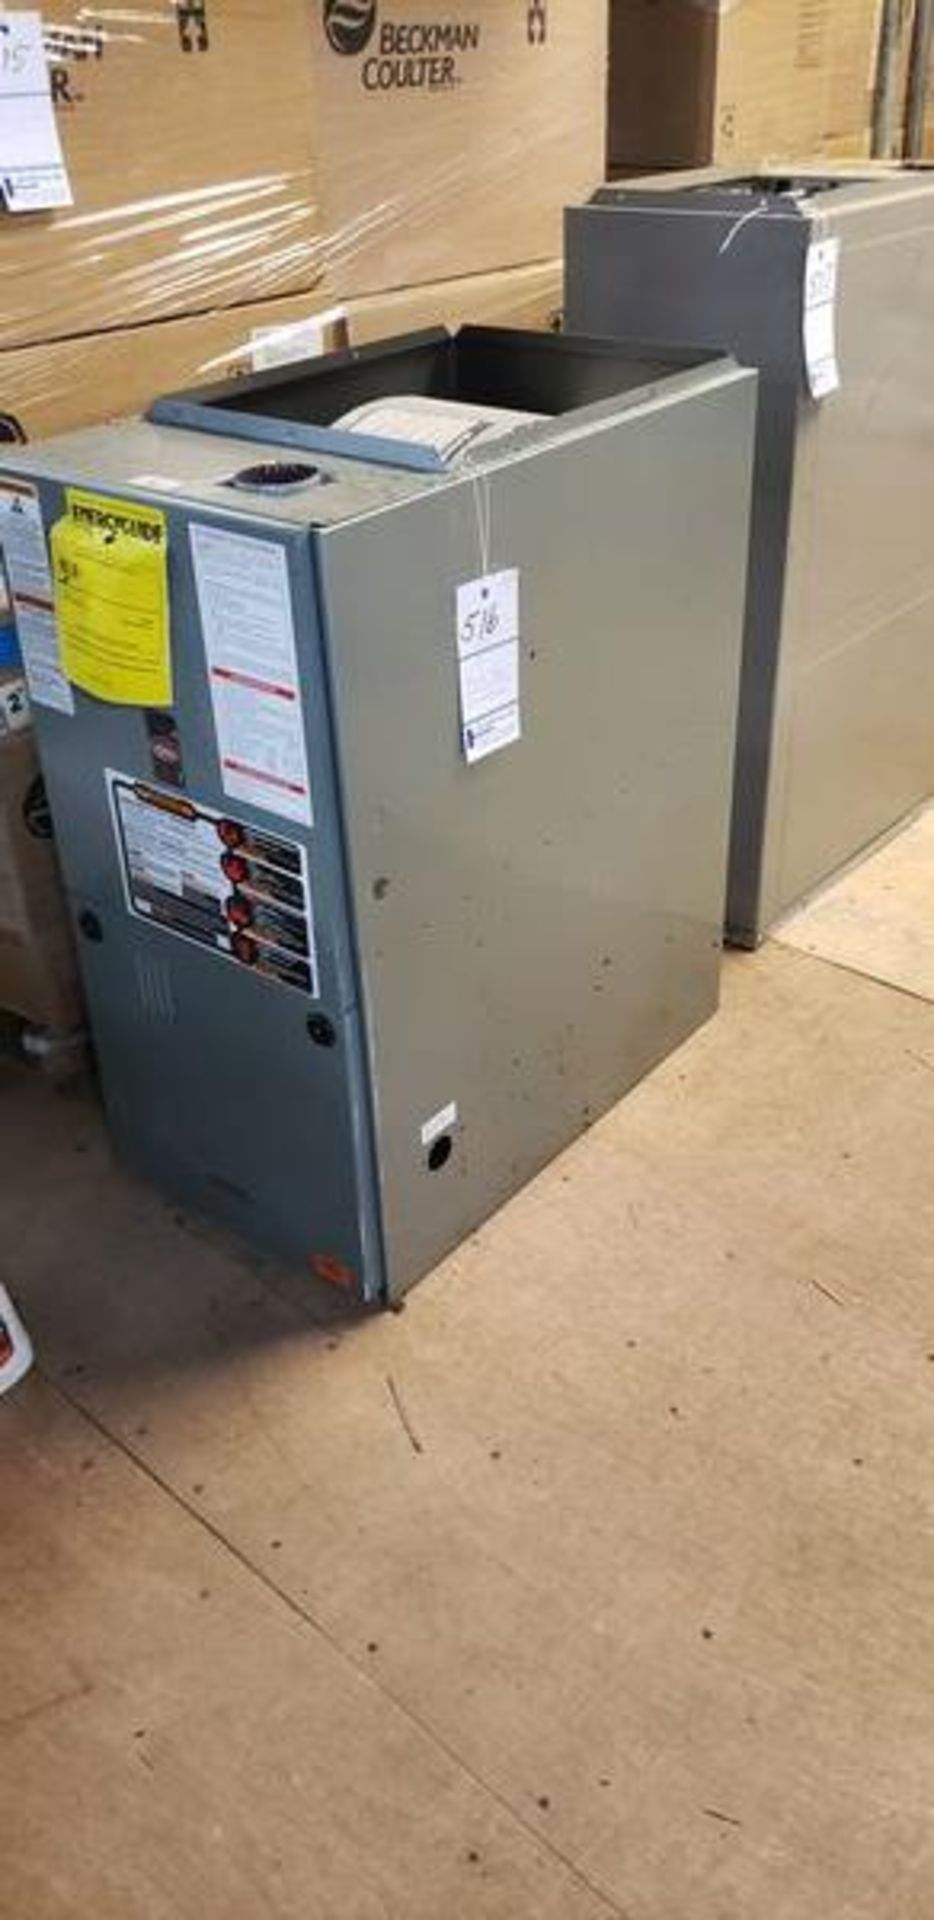 ICECO GAS FURNACE MODEL 80LS7EAR01 - Image 2 of 2